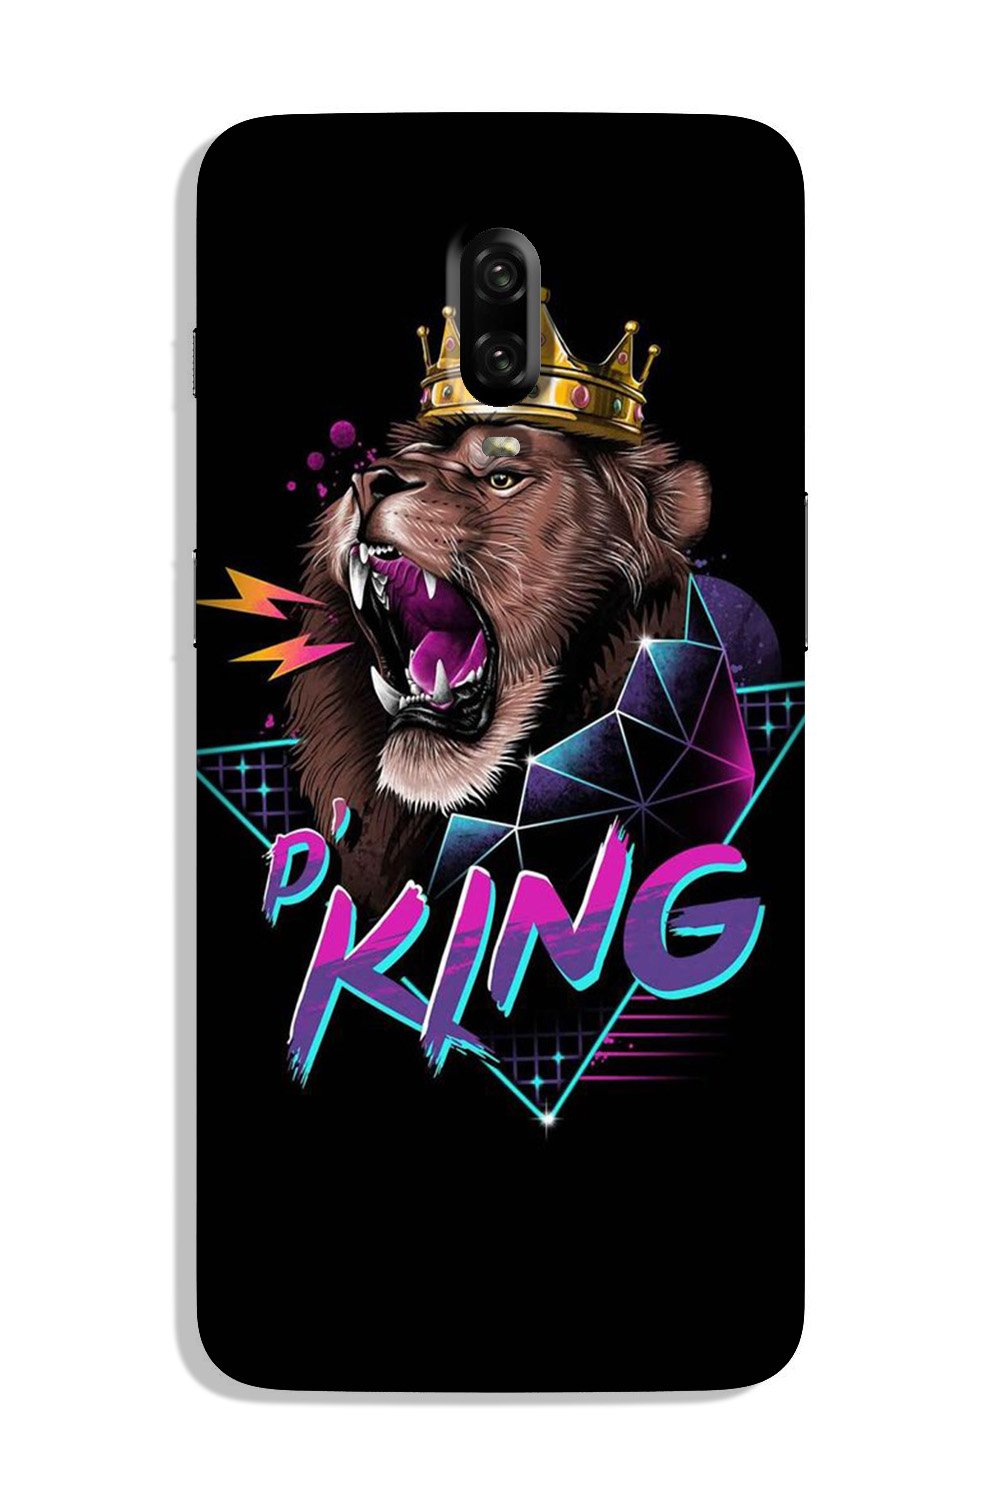 Lion King Case for OnePlus 7 (Design No. 219)